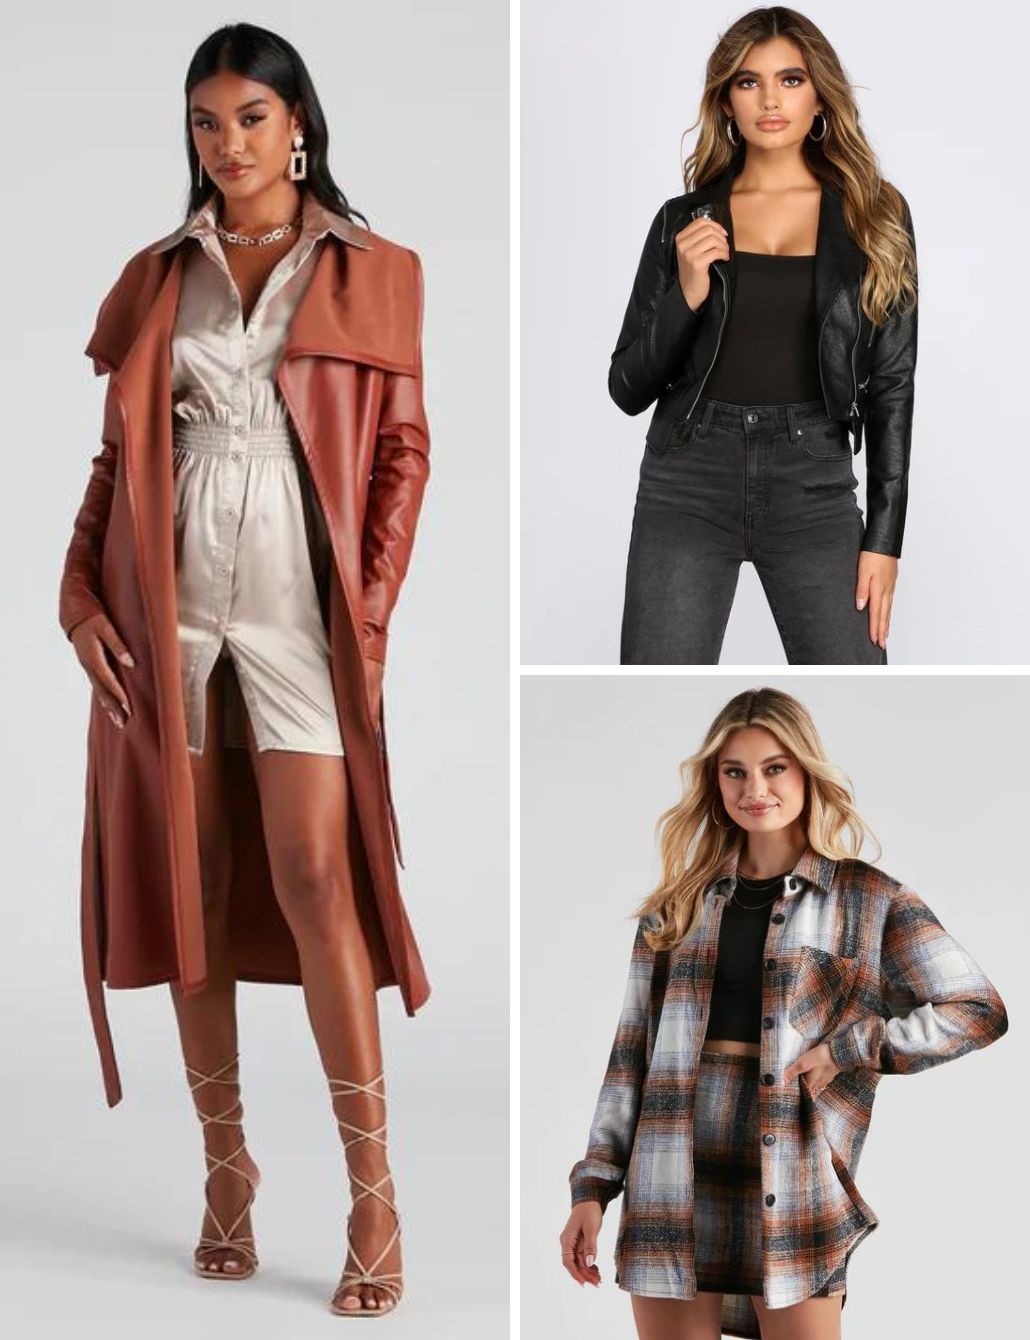 5 On-Trend Leather Jacket Outfits to Wear This Fall/Winter 2022 Season